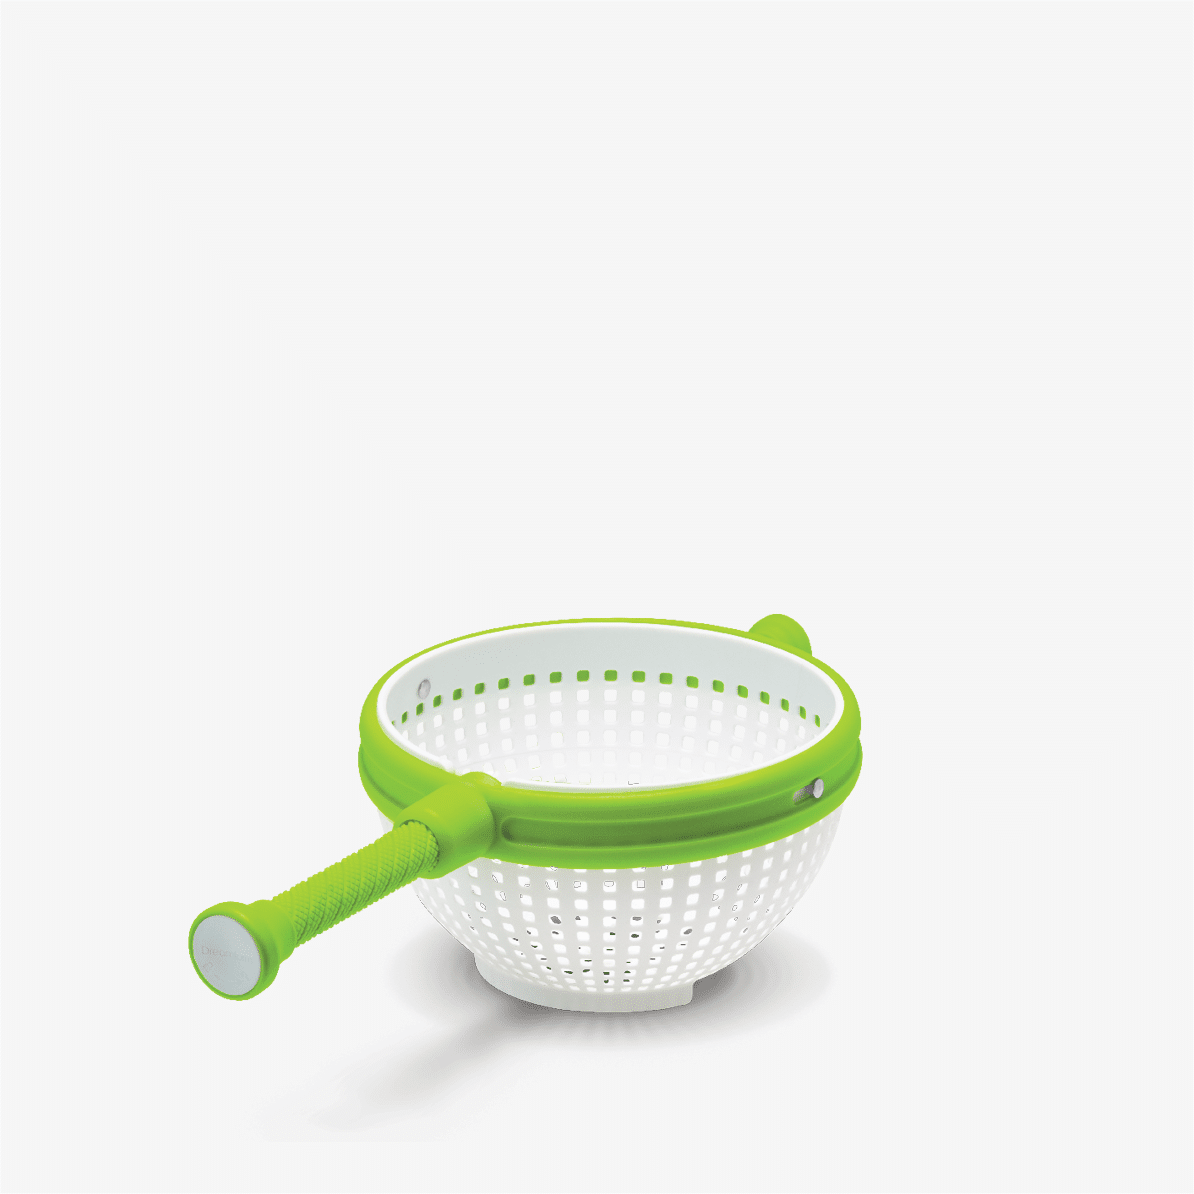 Spin and dry with ease using Spina! This versatile straining colander doubles as an in-sink salad spinner with a 3-quart/12-cup capacity. Non-slip foot and large basket prevent spills, and the handle offers a "quick stop" brake for fast and convenient storage. Upgrade your kitchen game with Spina today!